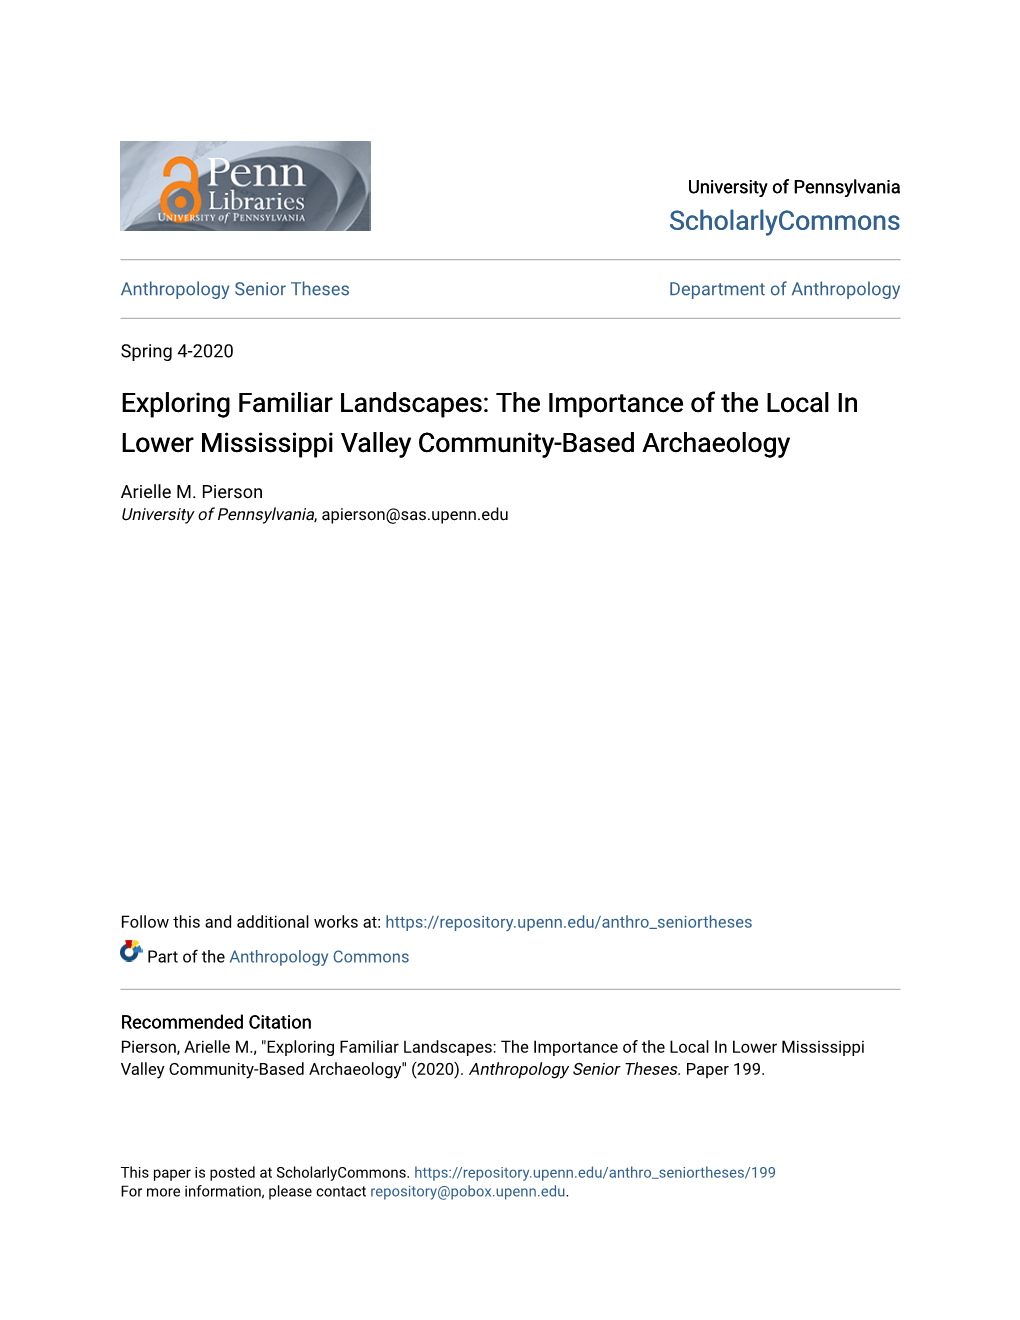 The Importance of the Local in Lower Mississippi Valley Community-Based Archaeology